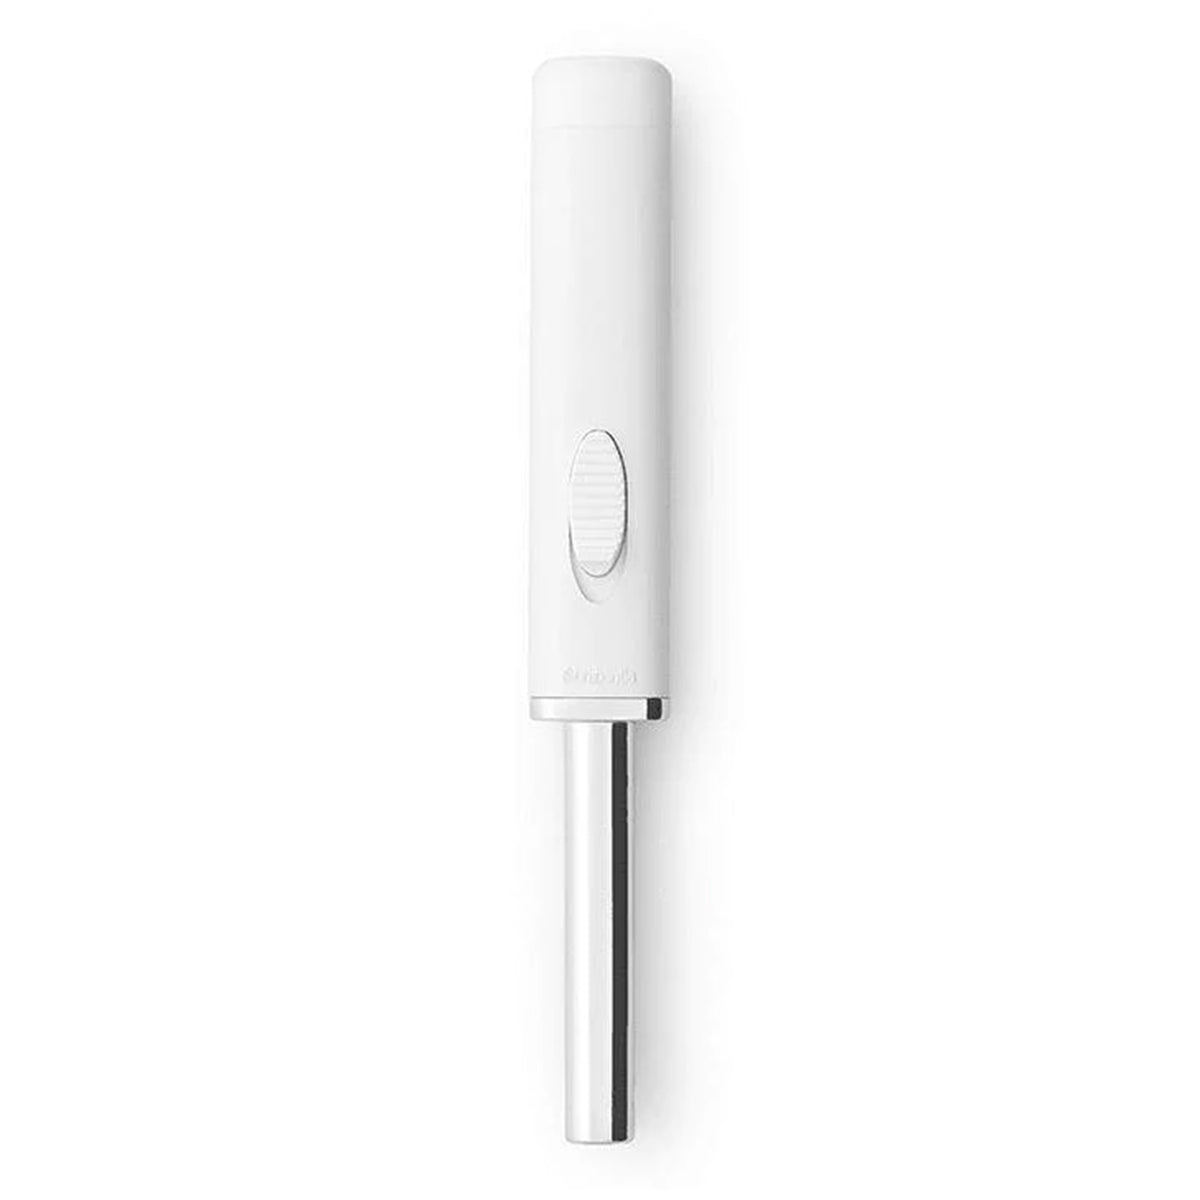 Flame Lighter - White This flame lighter is ideal in the kitchen for cooking, but also suitable for lighting candles, cigarettes, and open fires